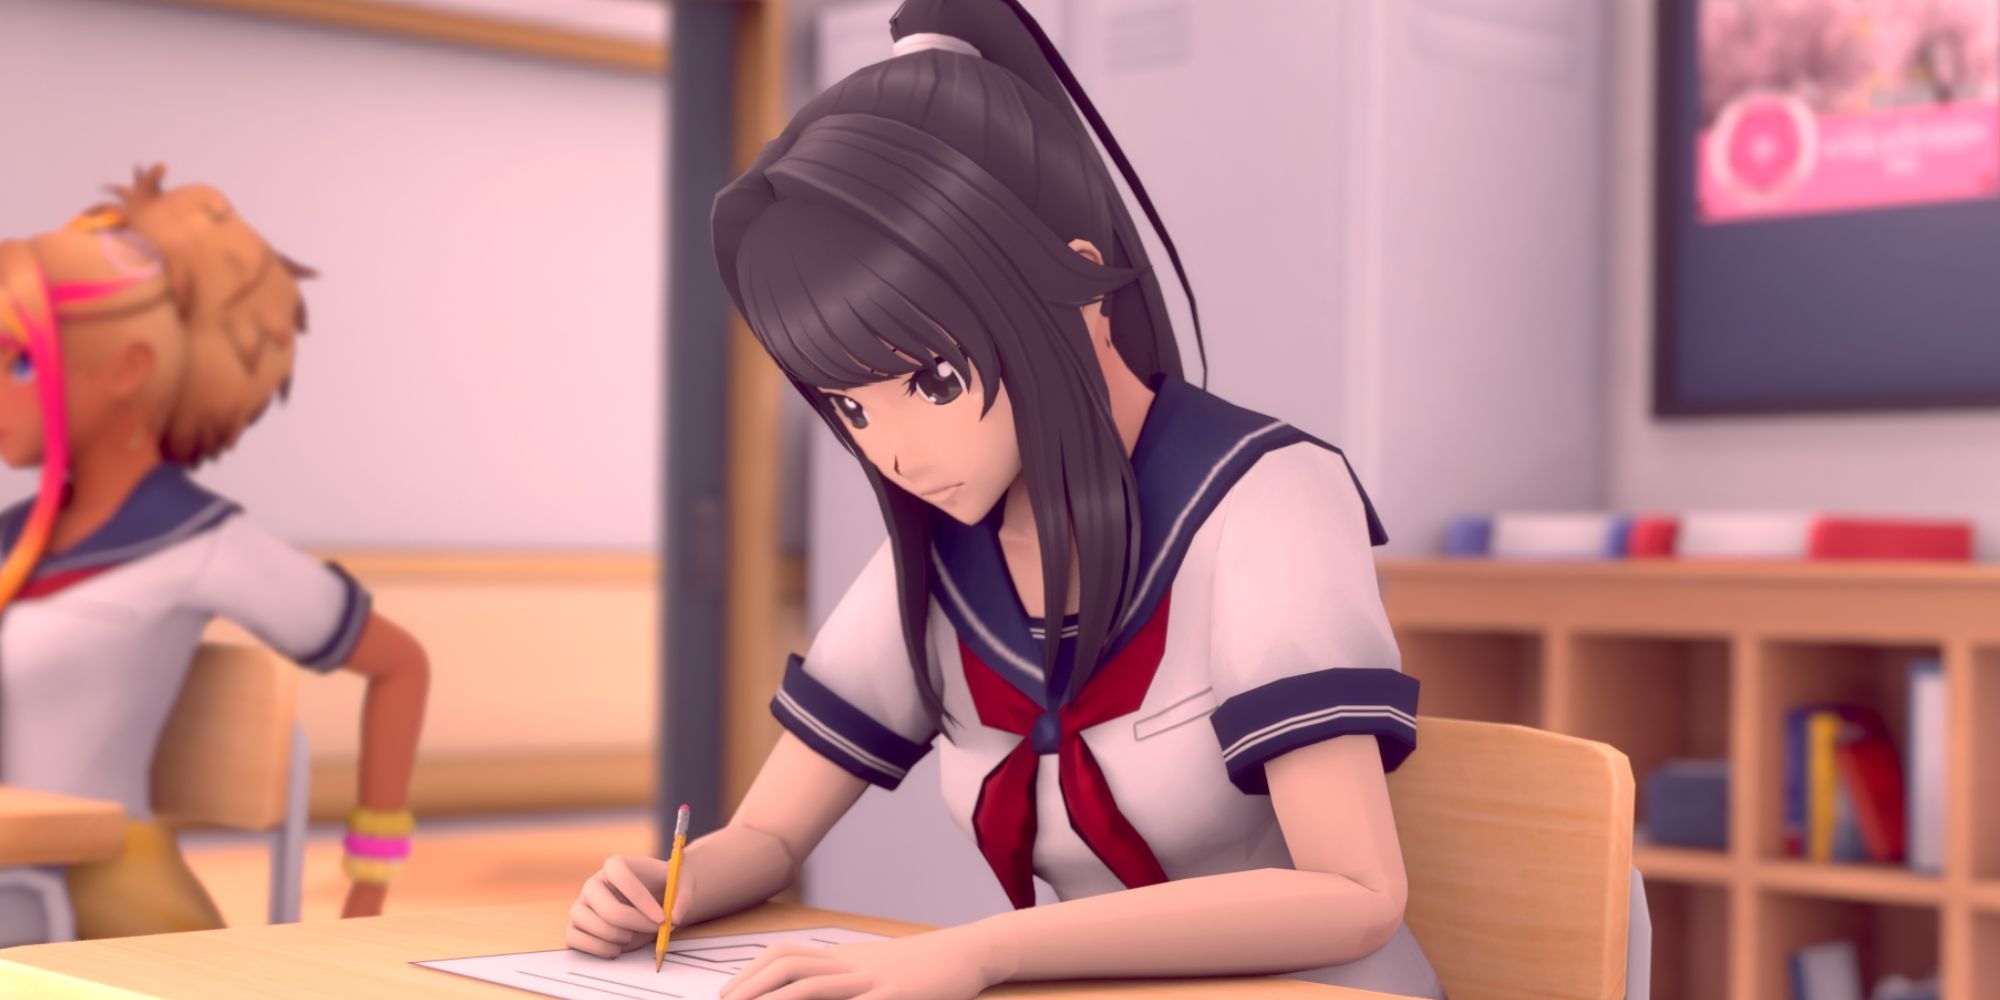 Yandere Simulator Devs And Voice Actors Quit Following Grooming